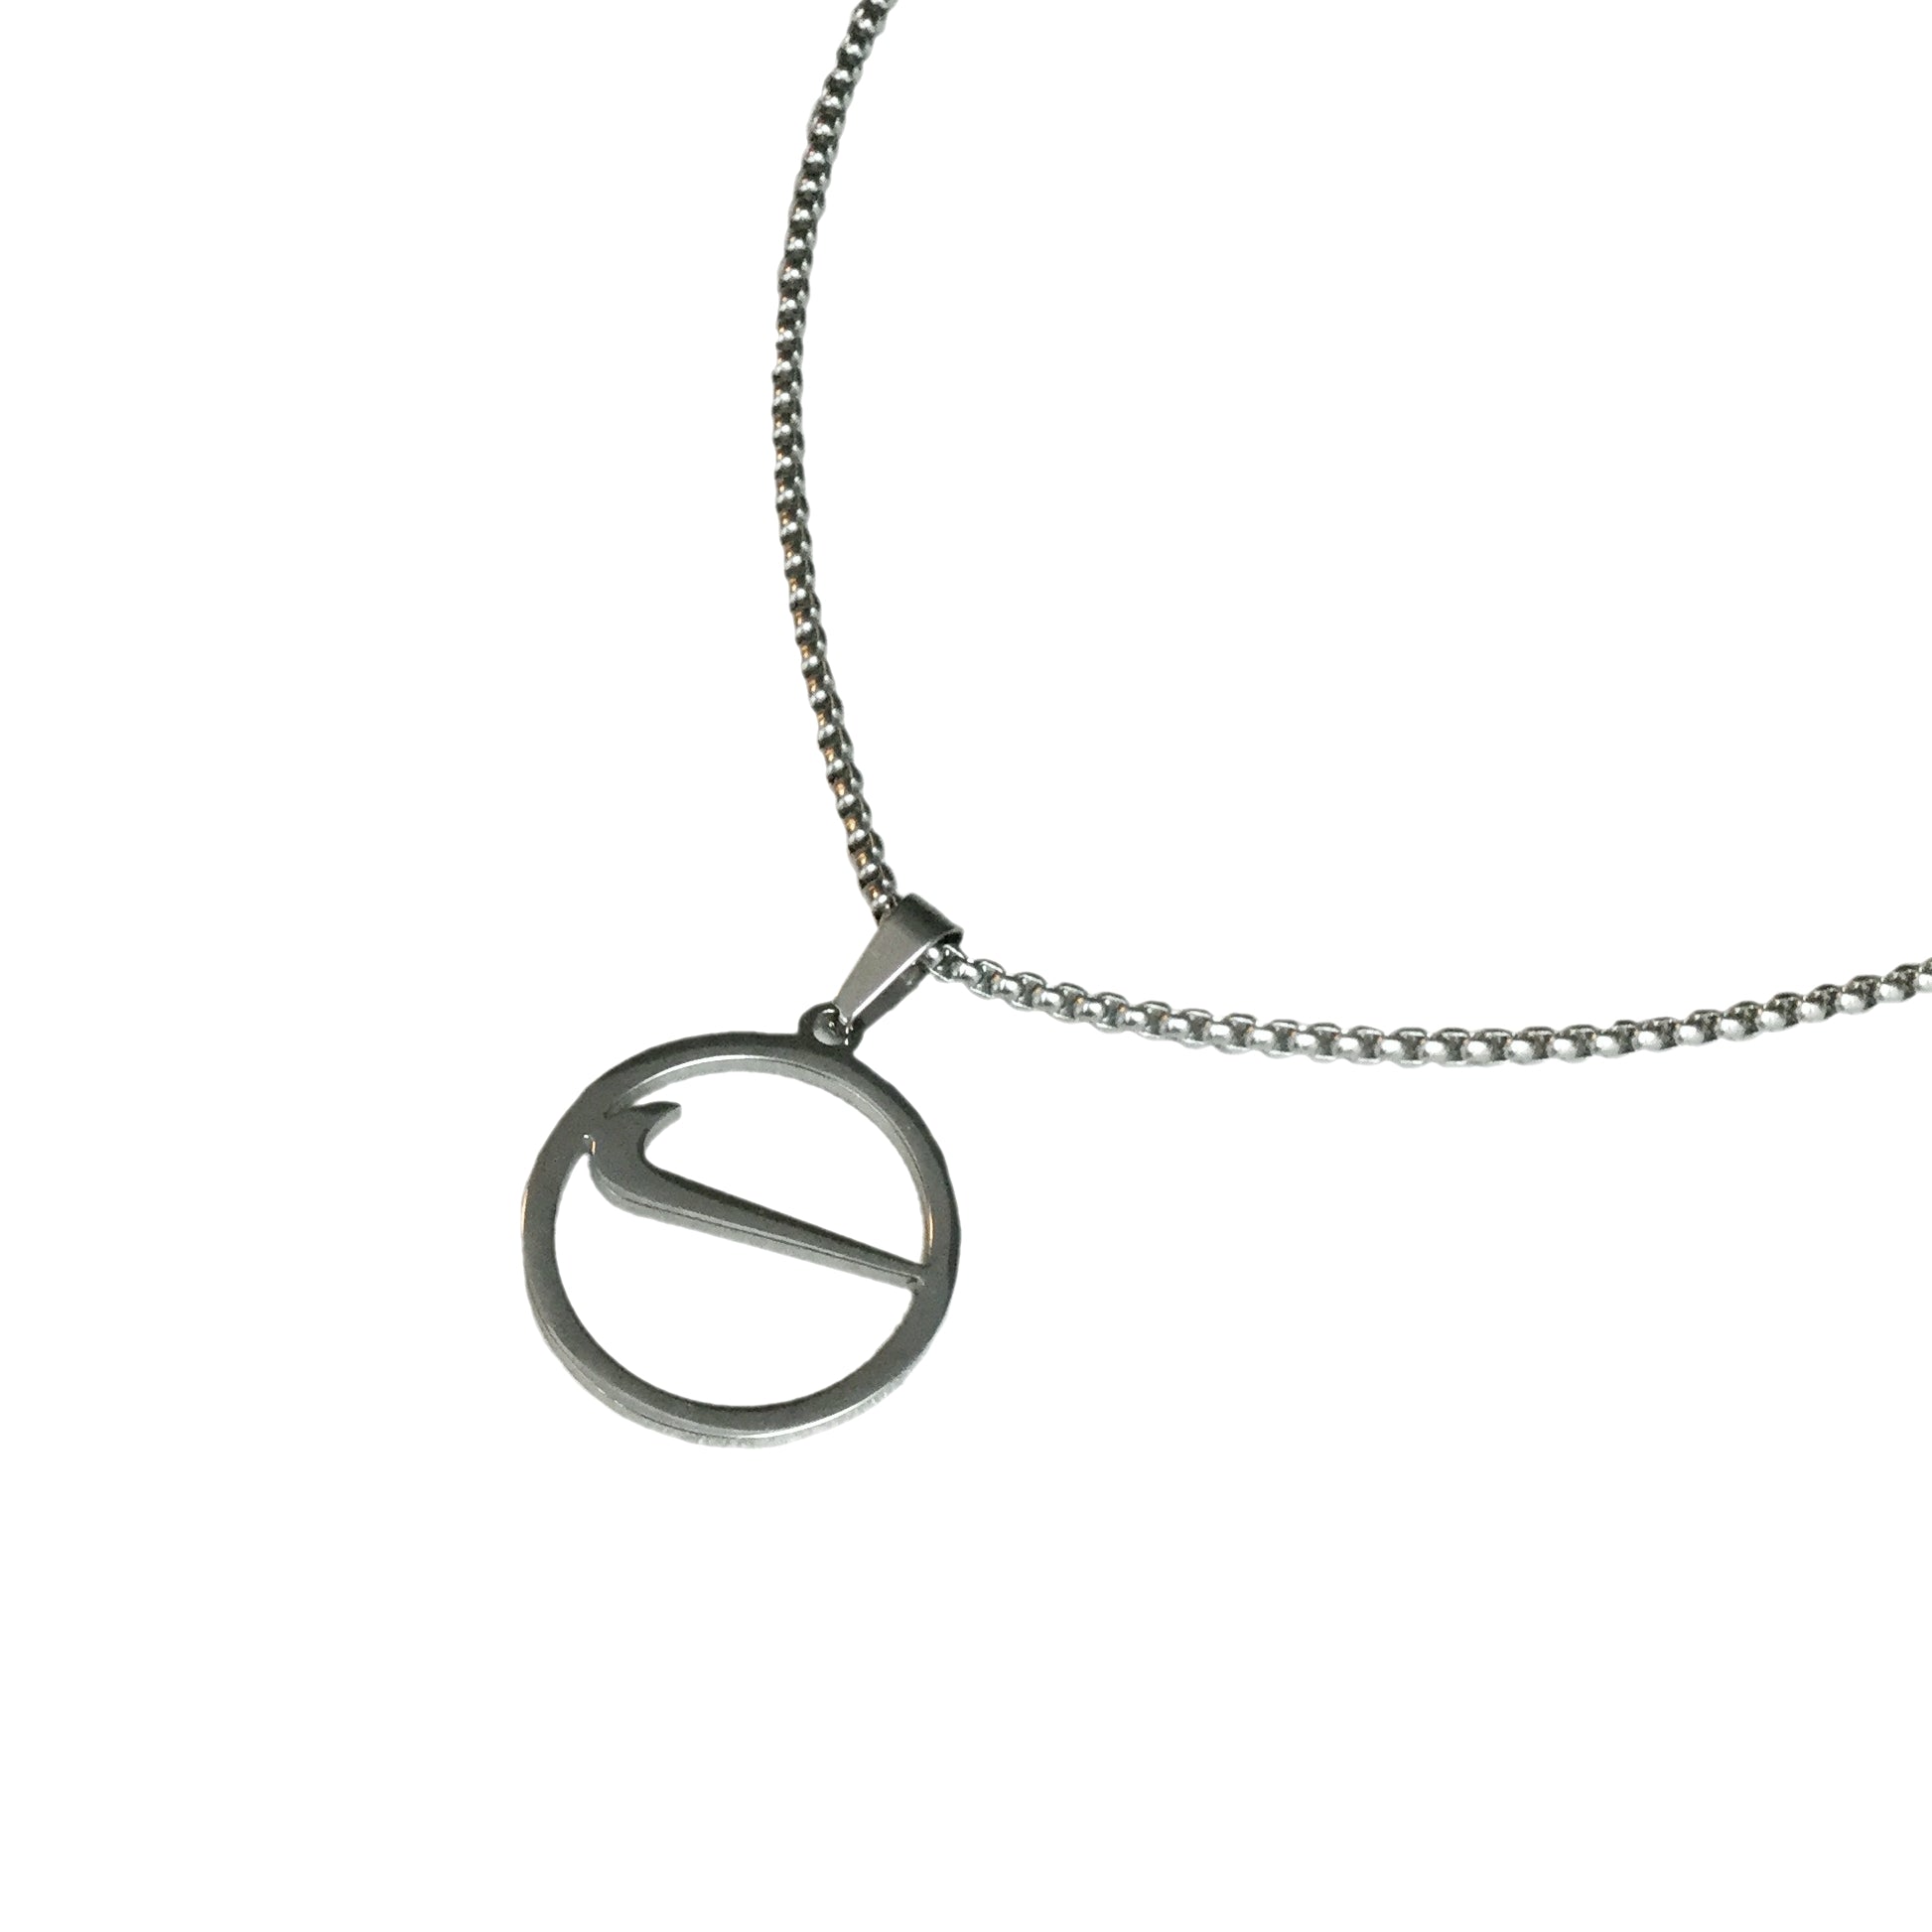 Nike Swoosh Necklace Silver